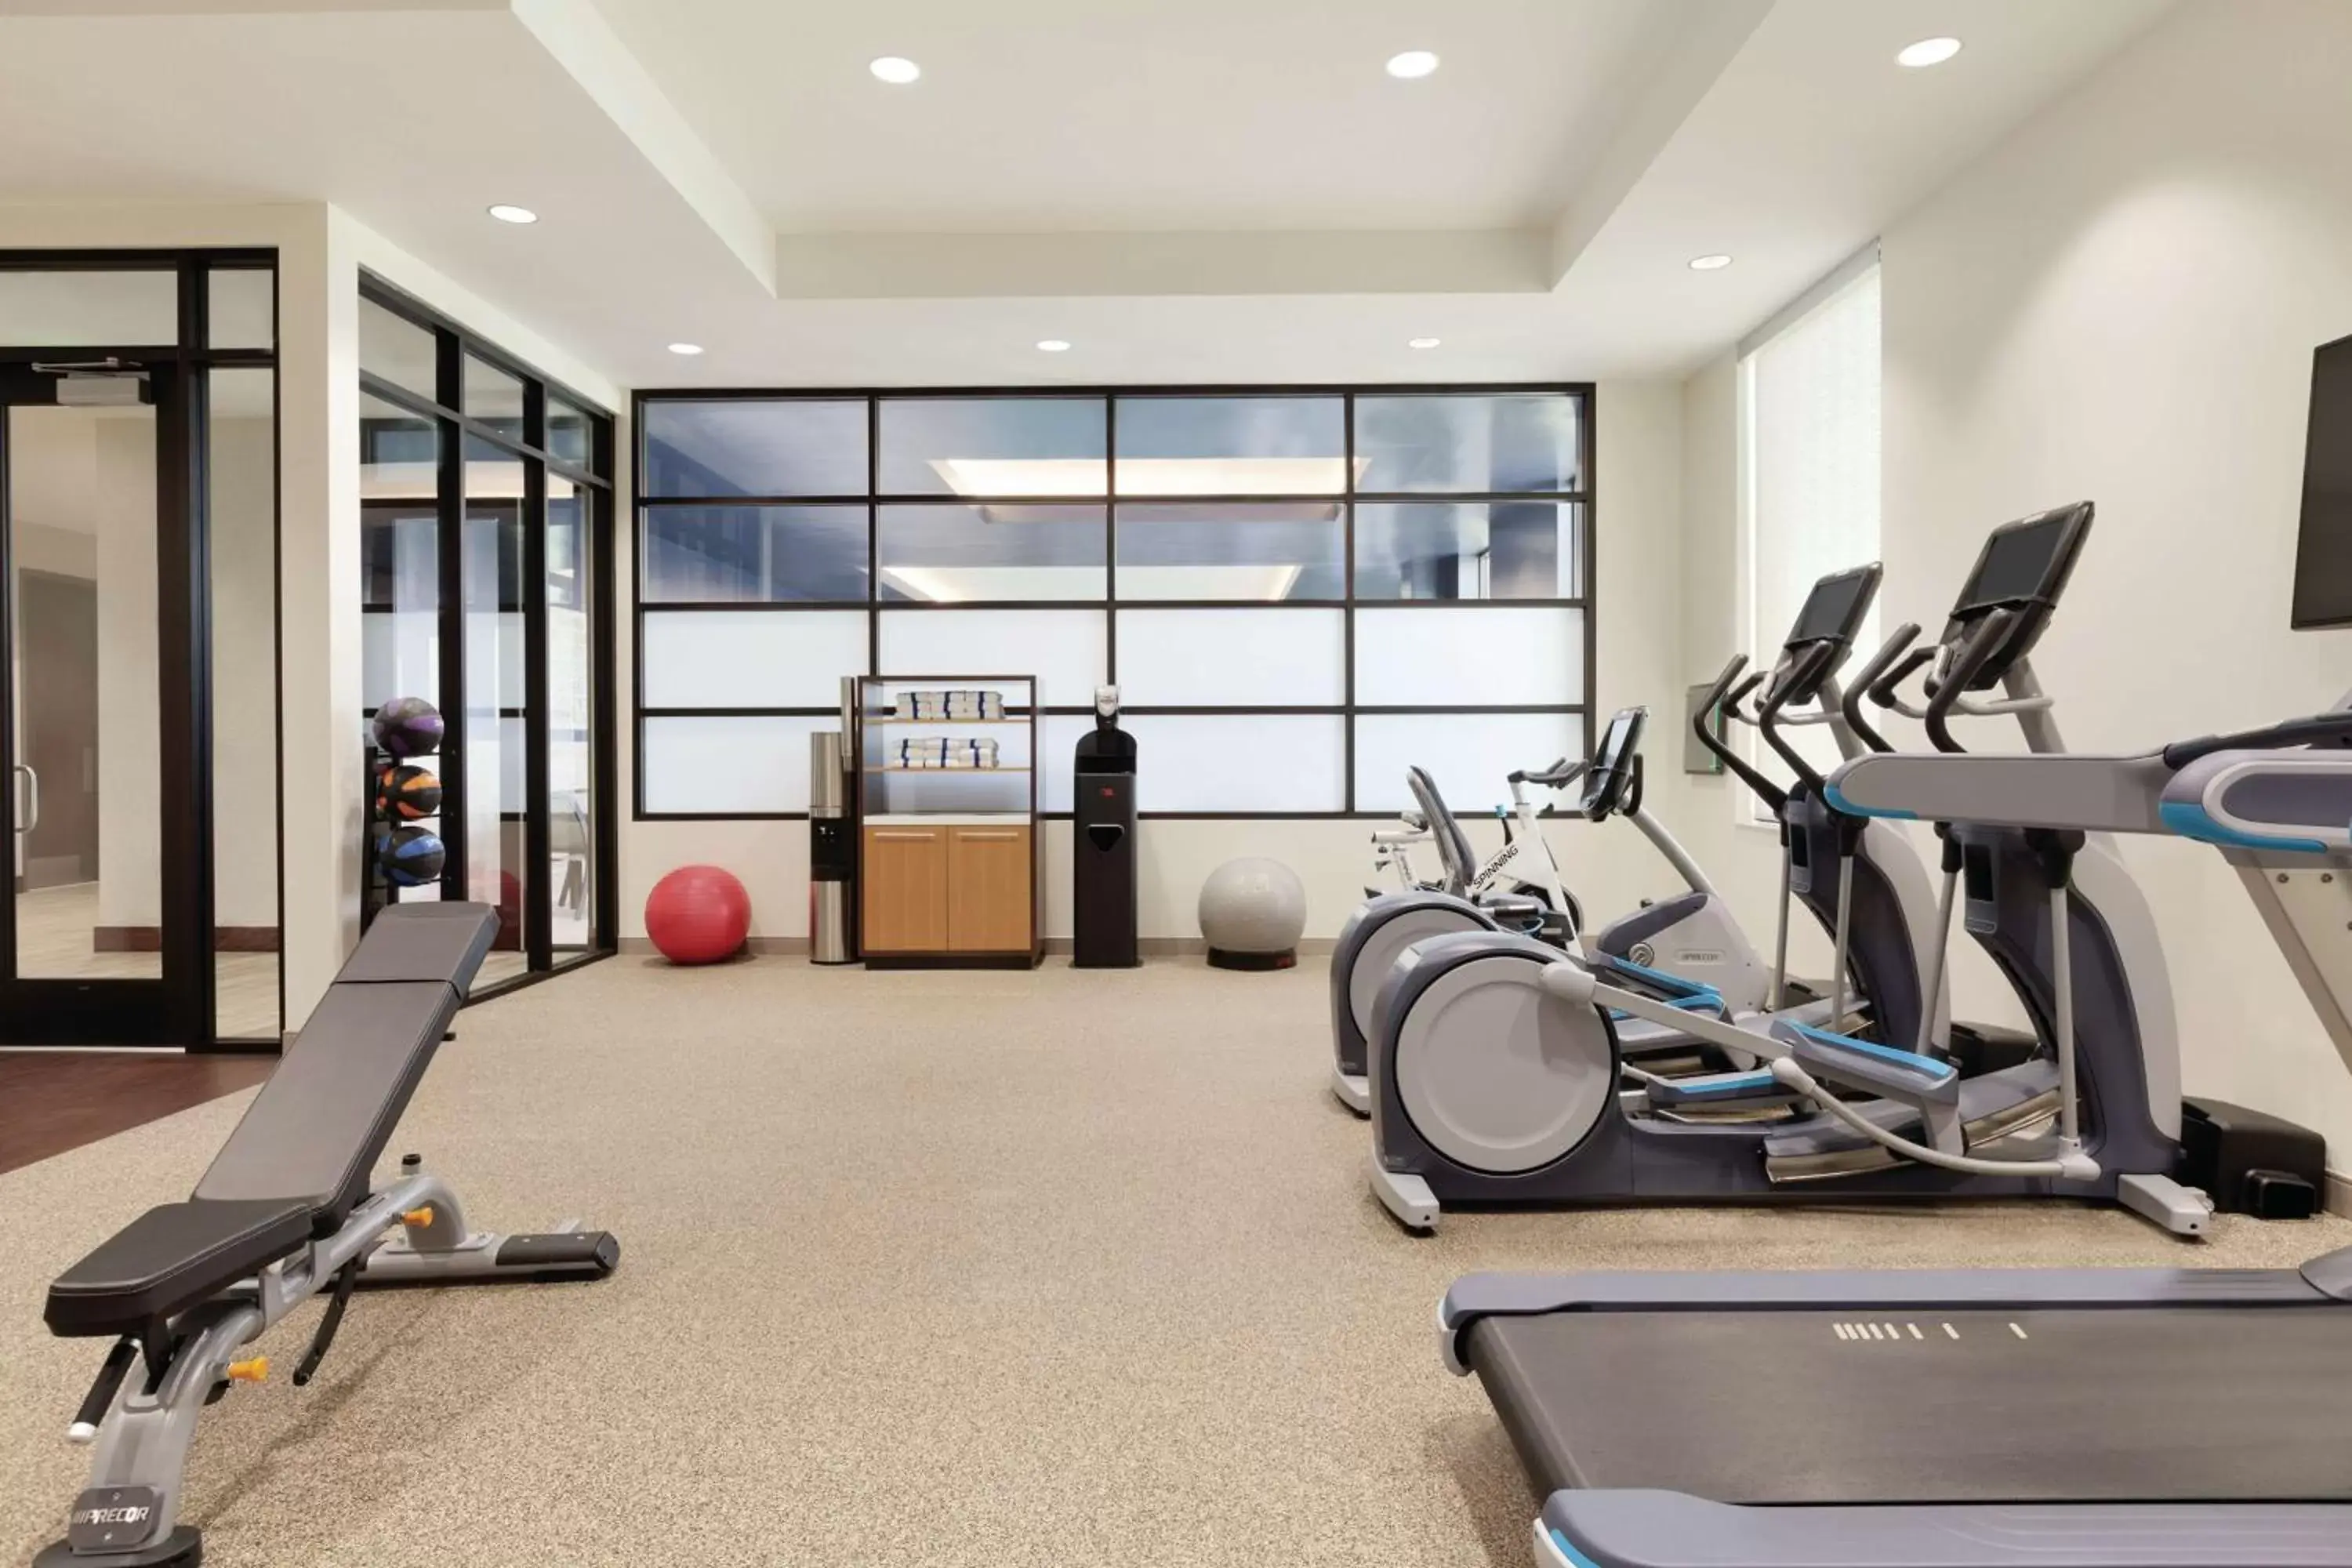 Fitness centre/facilities, Fitness Center/Facilities in Embassy Suites By Hilton South Jordan Salt Lake City